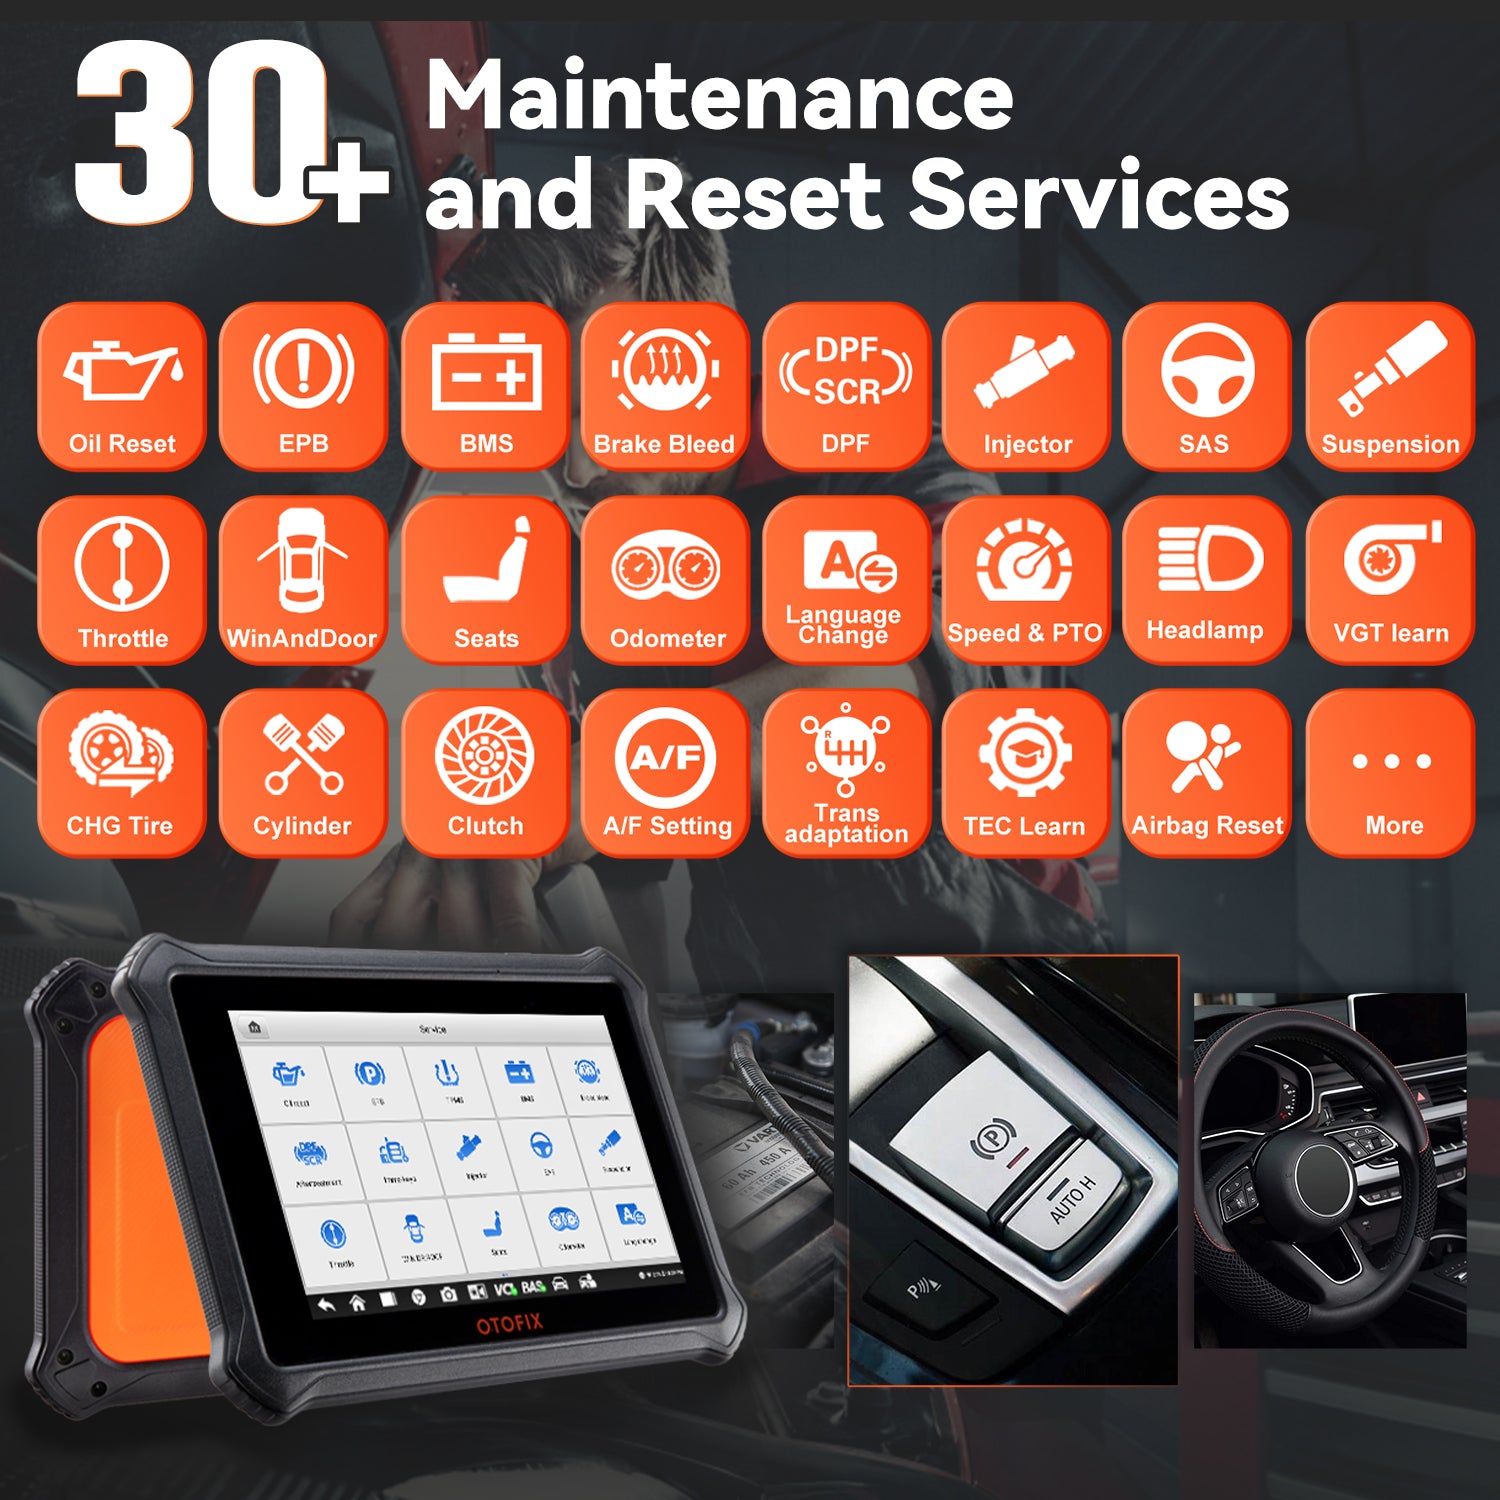 OTOFIX D1 diagnostic tool provide various scheduled services including Oil Reset, EPB Reset, TPMS Reset, BMS Reset, ABS Bleeding, DPF Regeneration, Injector Coding, SAS Reset, Throttle Matching, Windows Calibration, etc more than 30 maintenance service